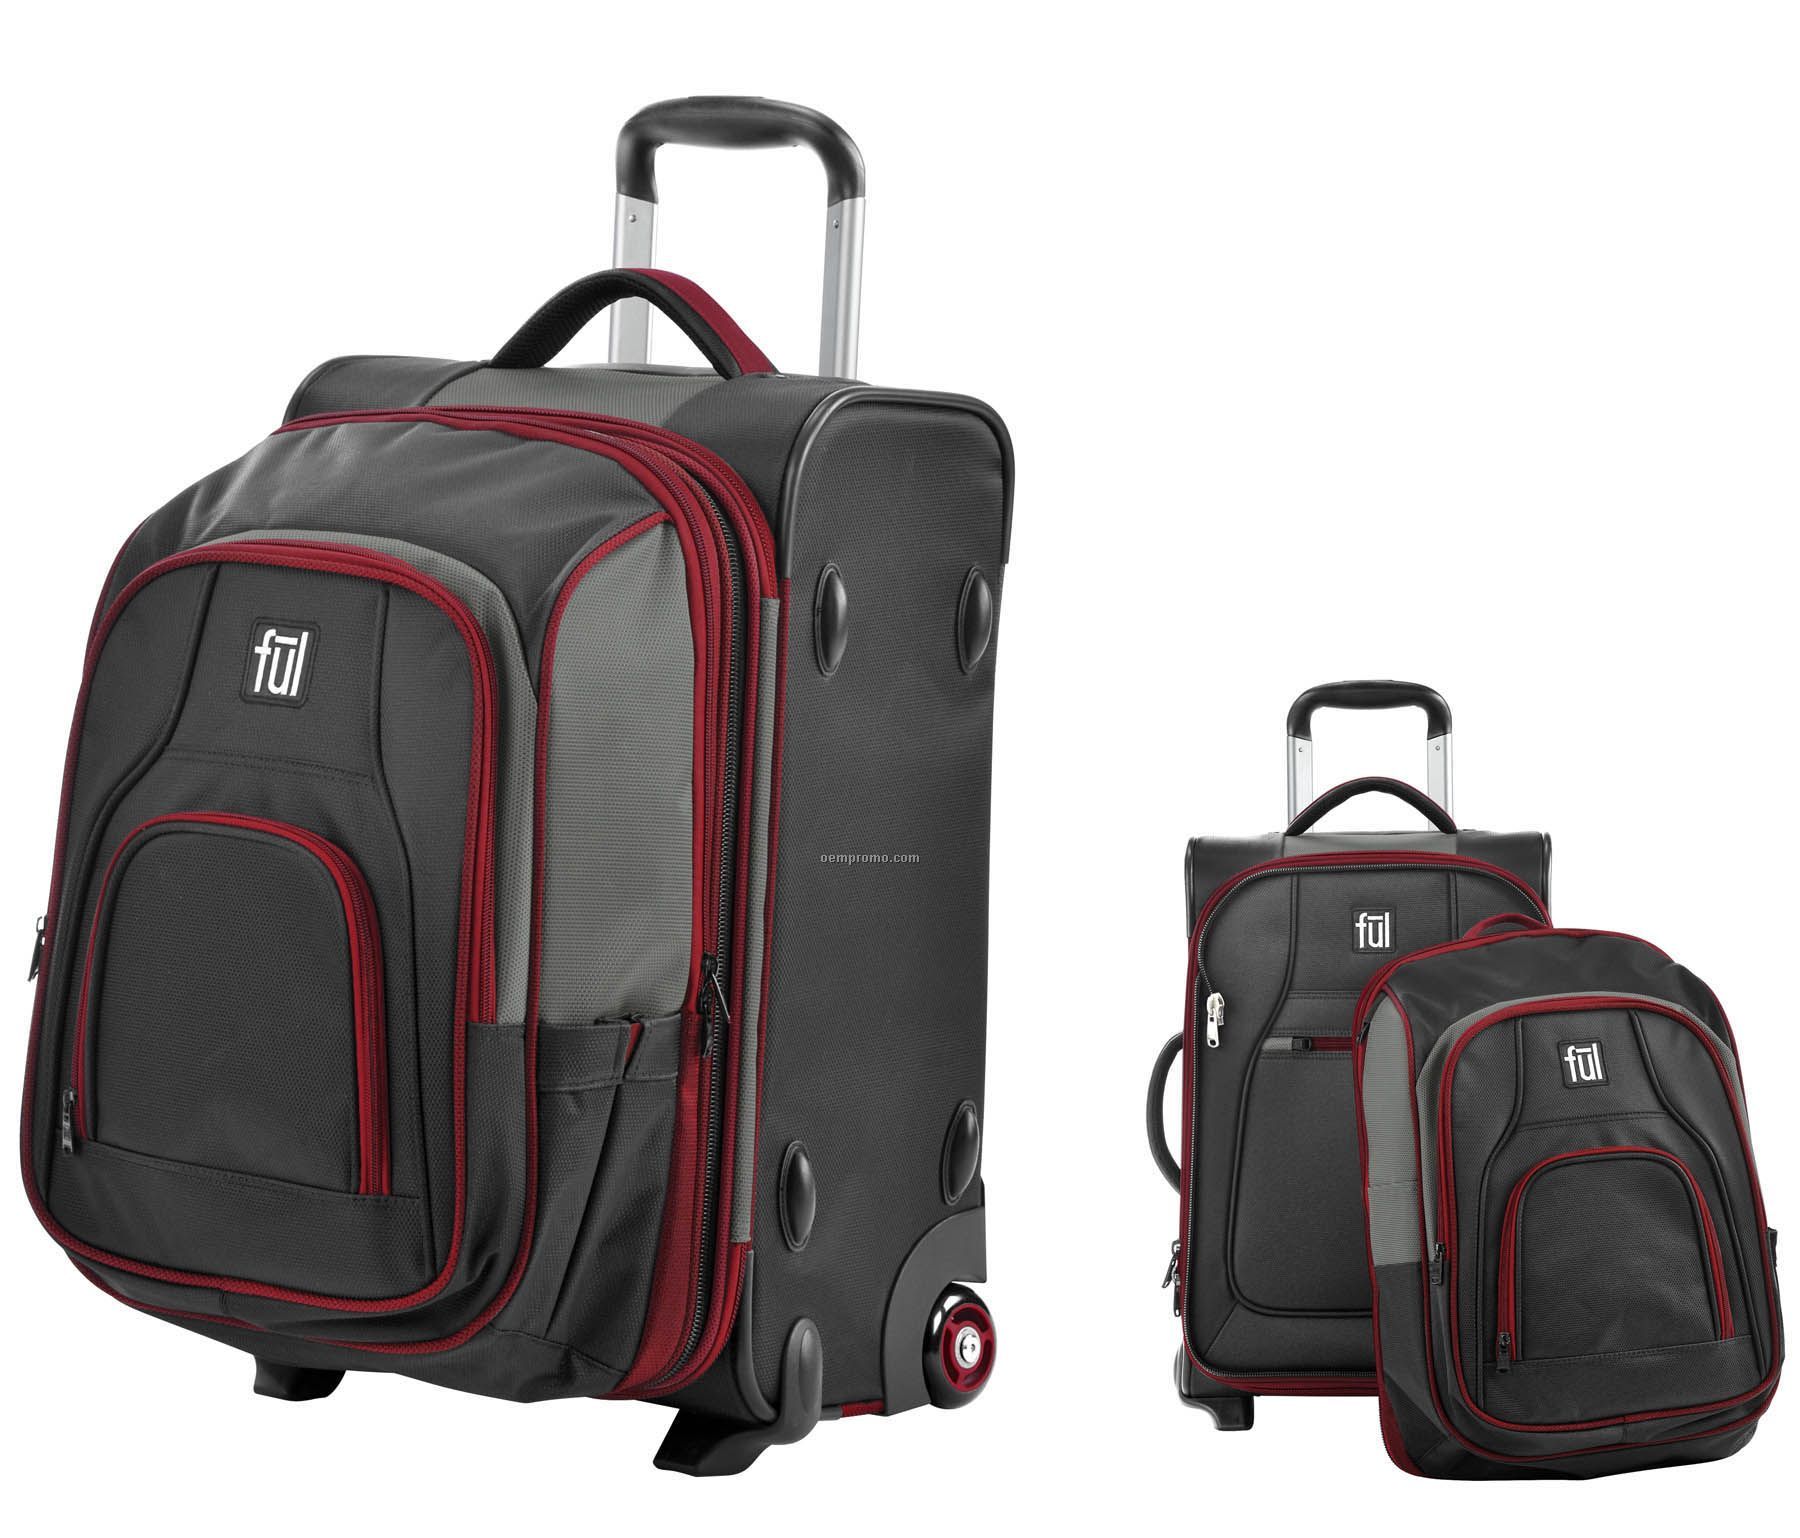 Ful Double Take 21" Wheeled Luggage With Zip-on Backpack Combo